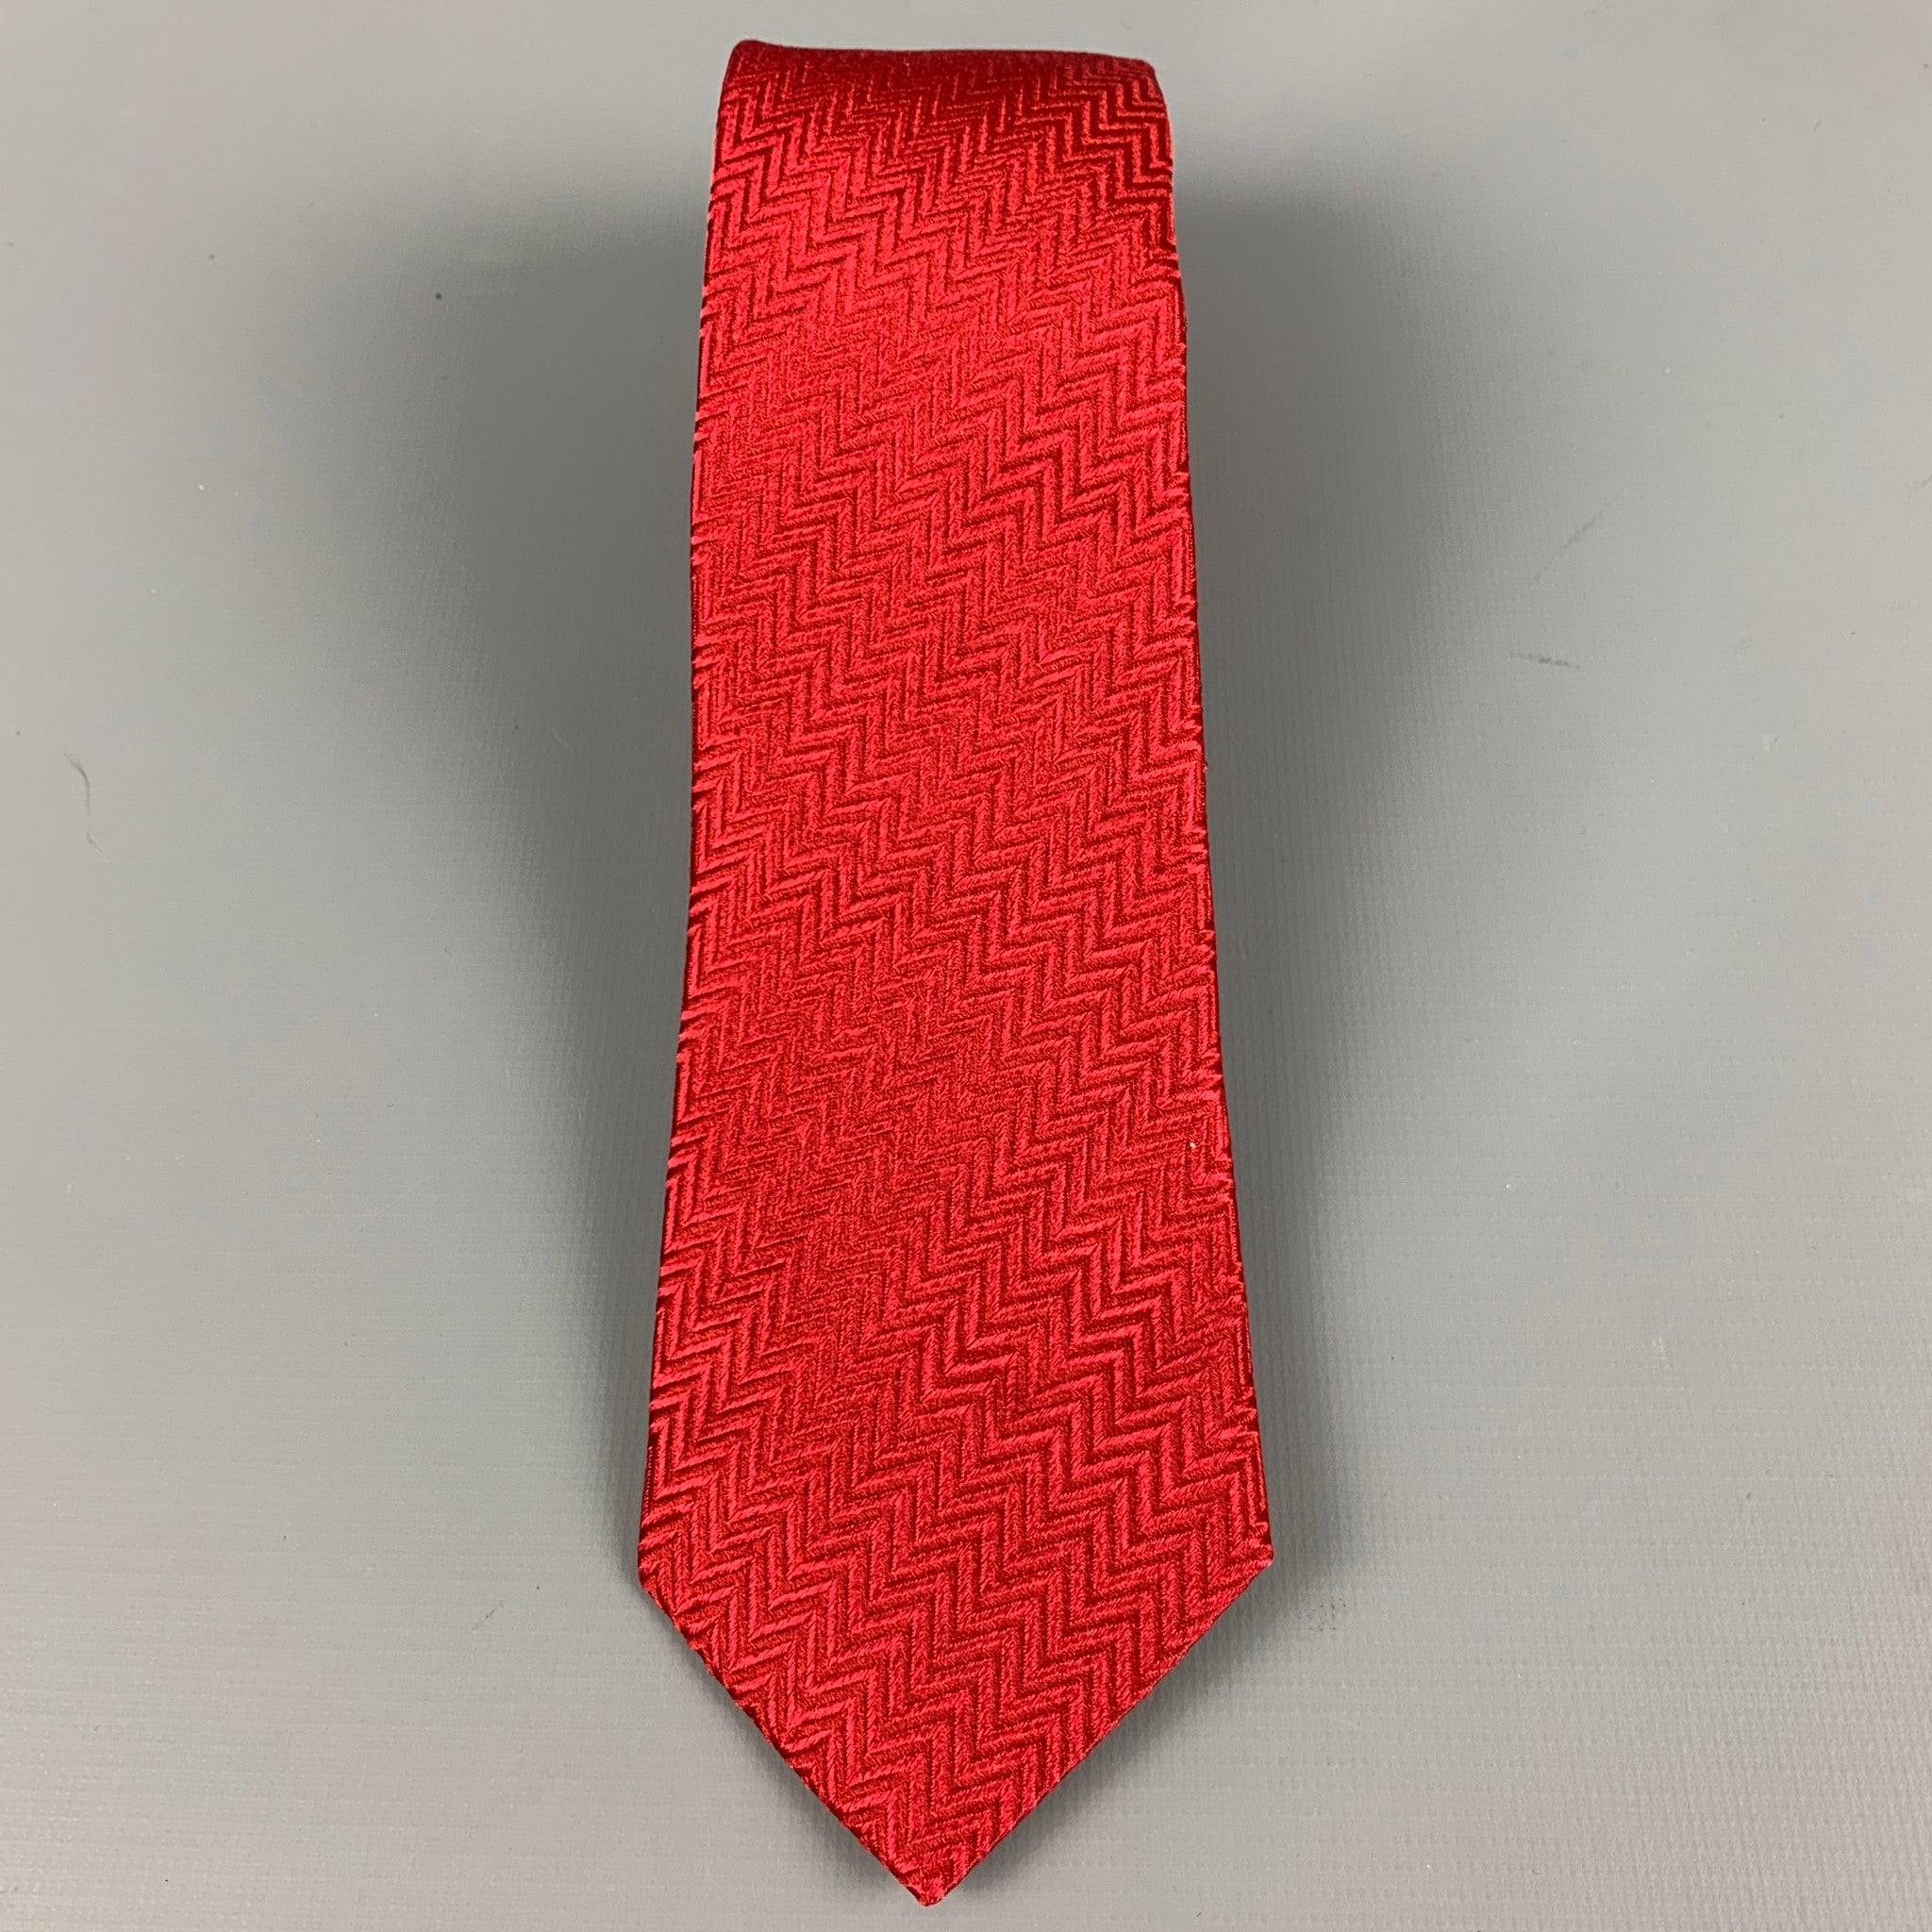 ARMANI COLLEZIONI
necktie in a red silk fabric featuring jacquard style and zig zag pattern. Made in Italy.Excellent Pre-Owned Condition. 

Measurements: 
  Width: 3 inches Length: 58.5 inches 
  
  
 
Reference: 127315
Category: Tie
More Details
  